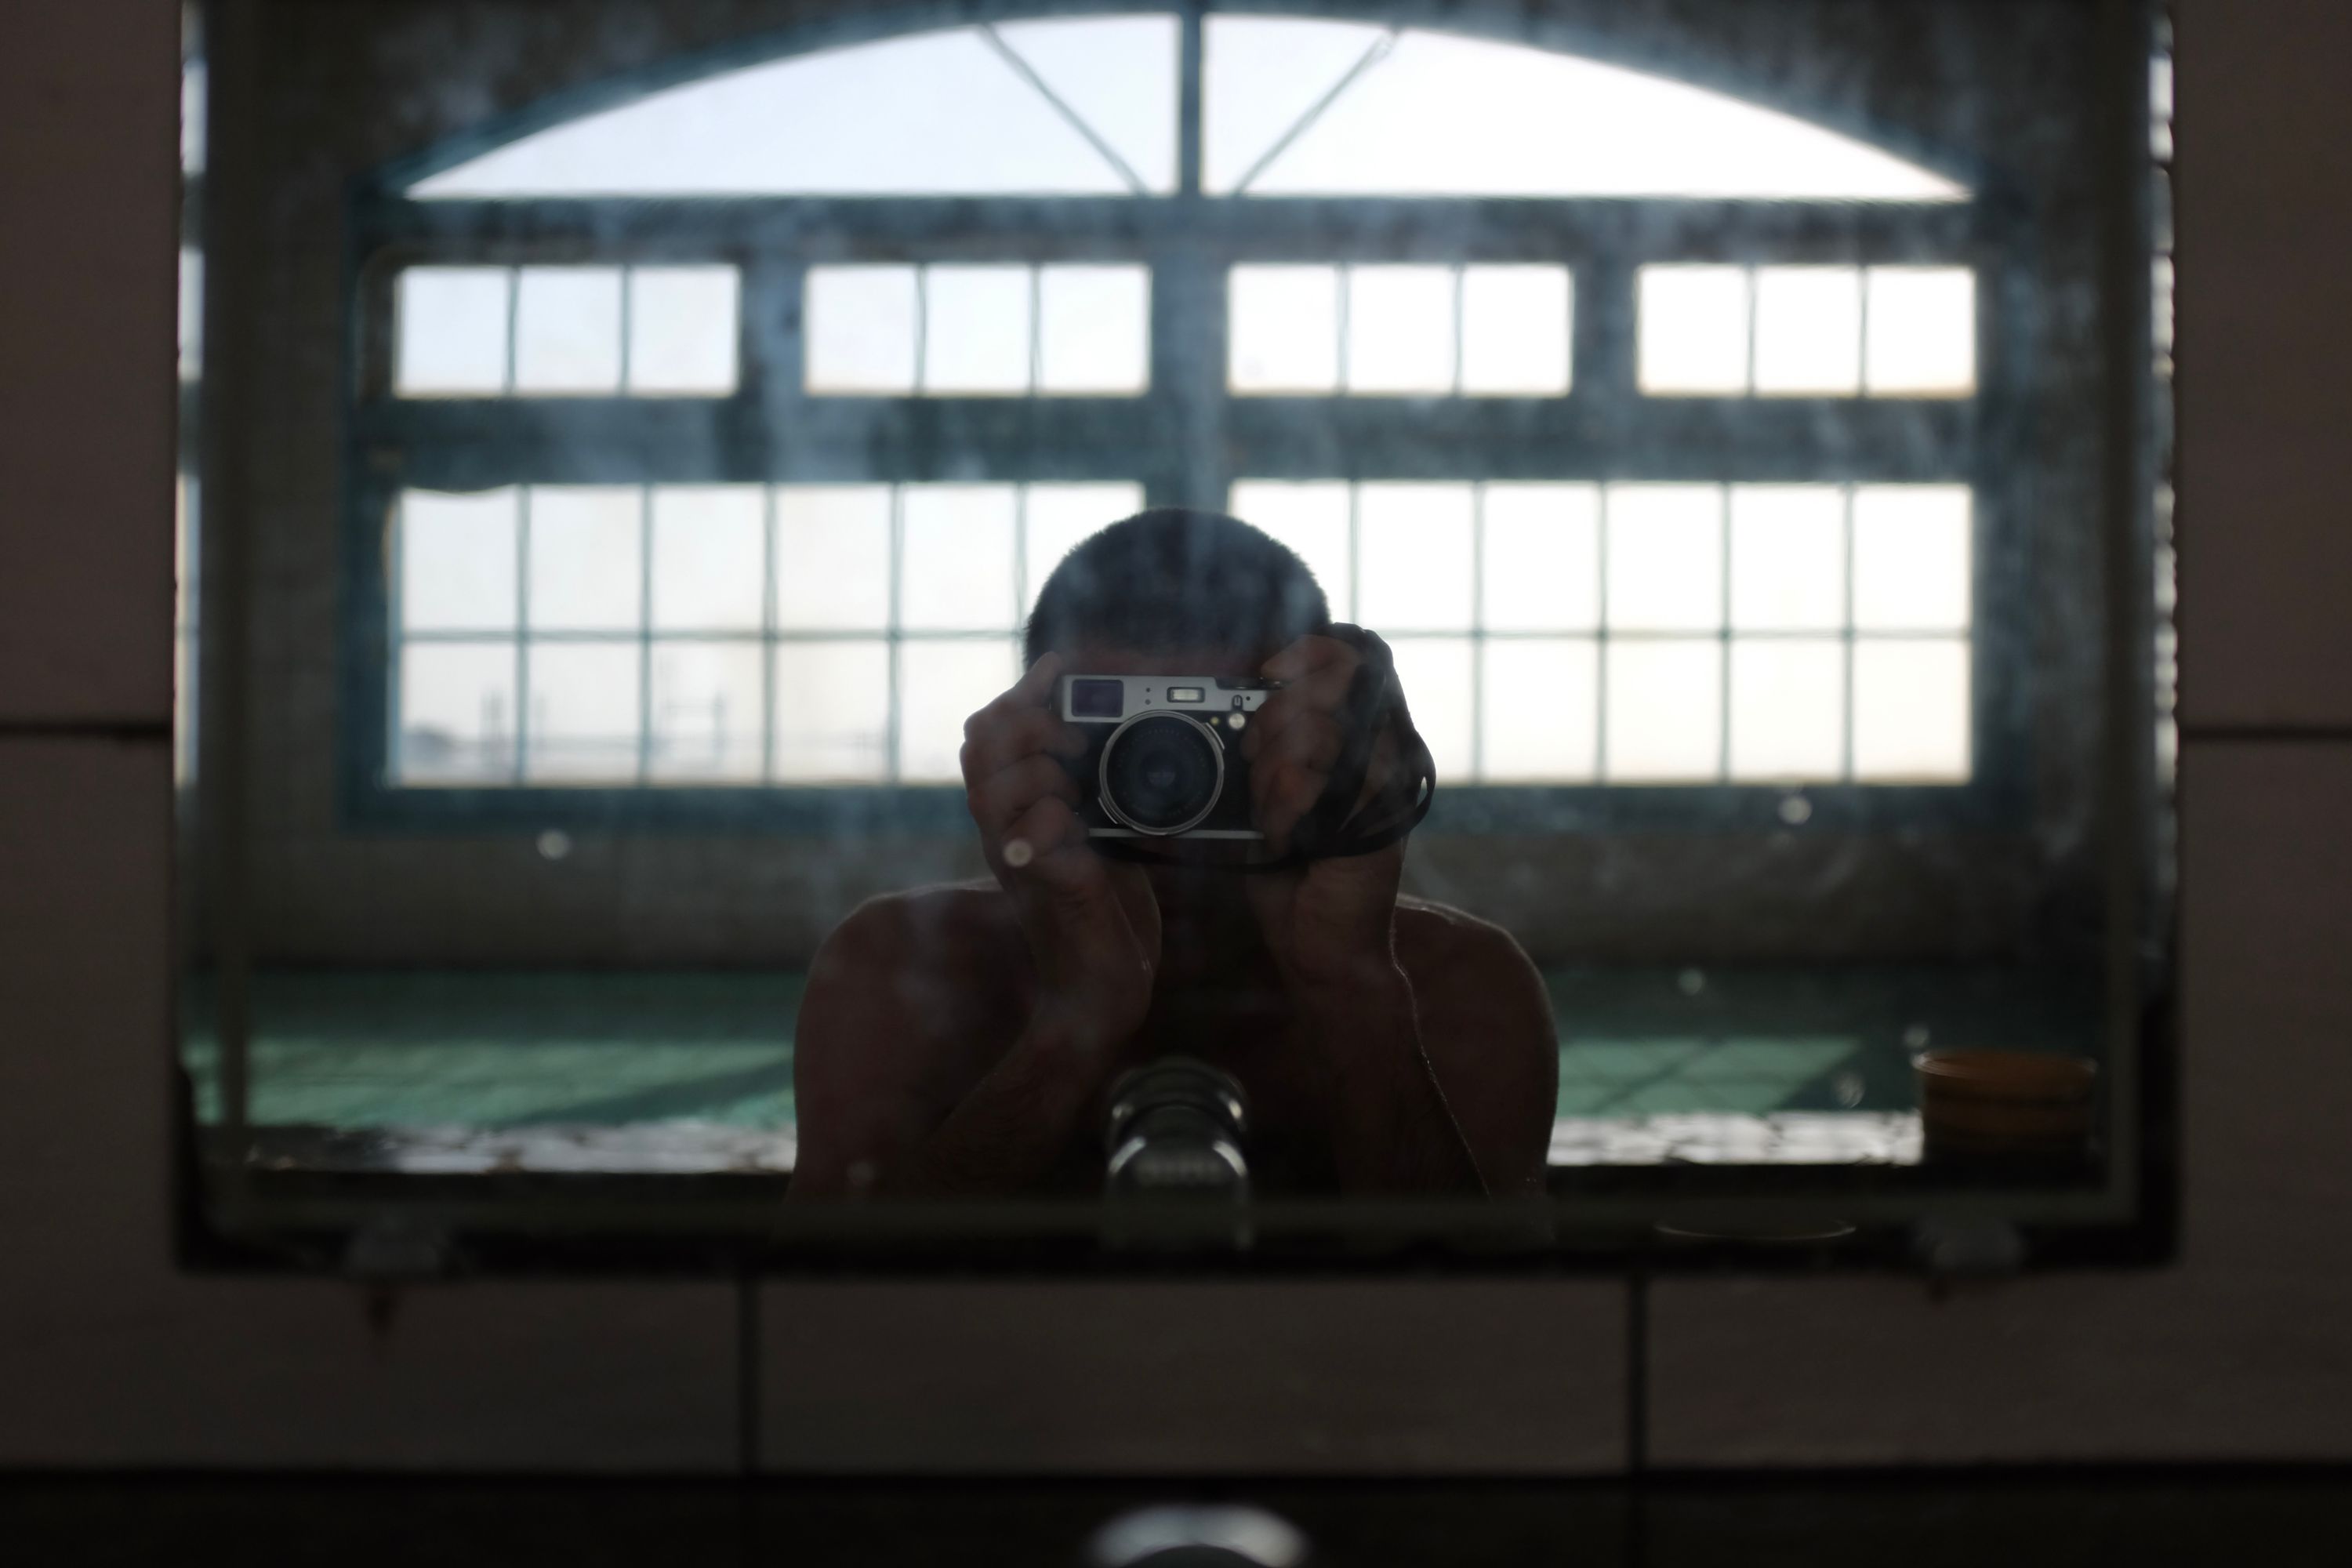 The author takes a self-portrait in the mirror of a public bath, the mirror obscuring his face, a large window visible behind him.